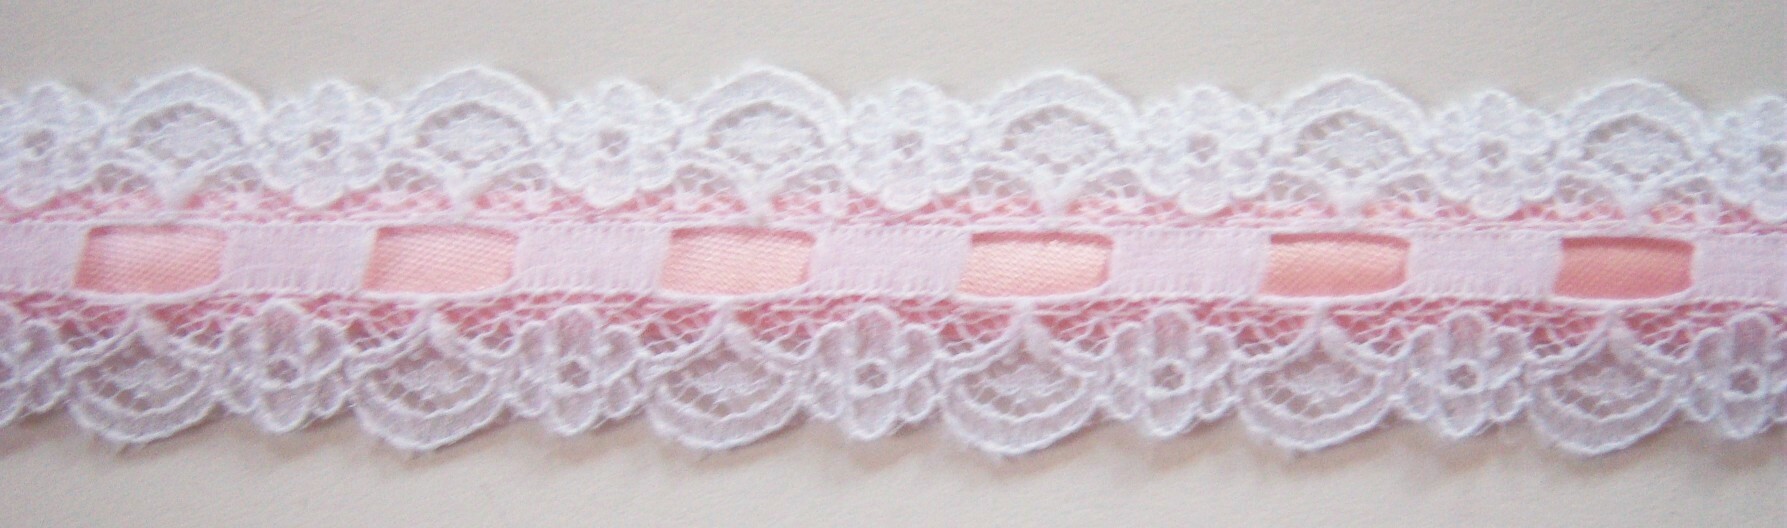 White/Pink Off Grain 1" Lace